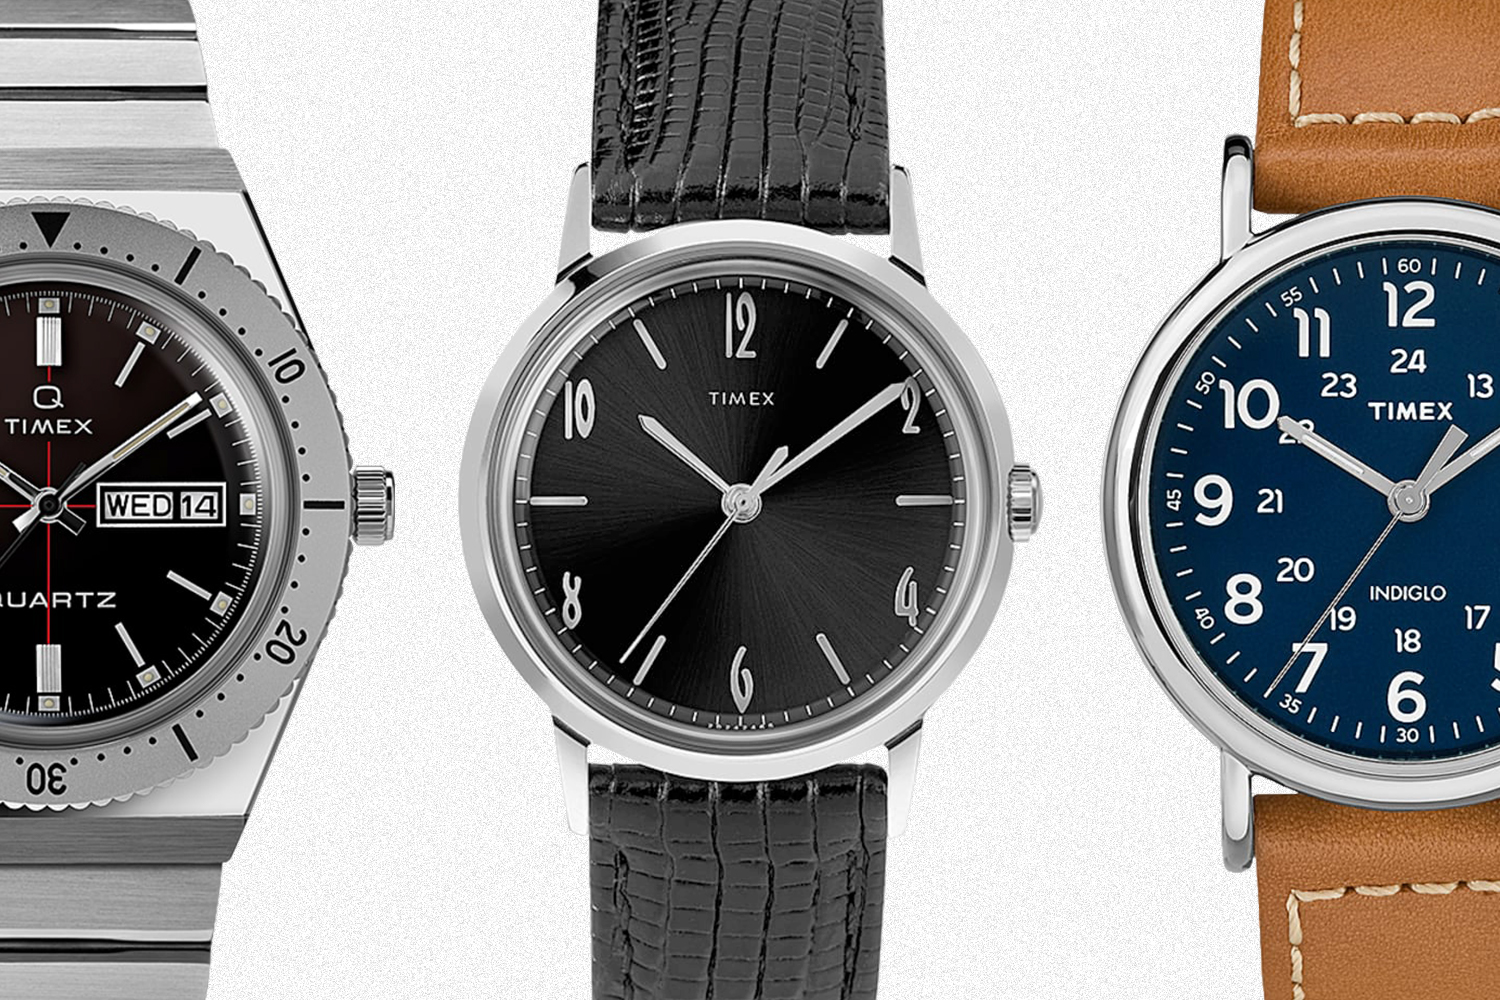 It's Up to 50% Off at Timex. Here Are 5 Watches to Buy. - InsideHook